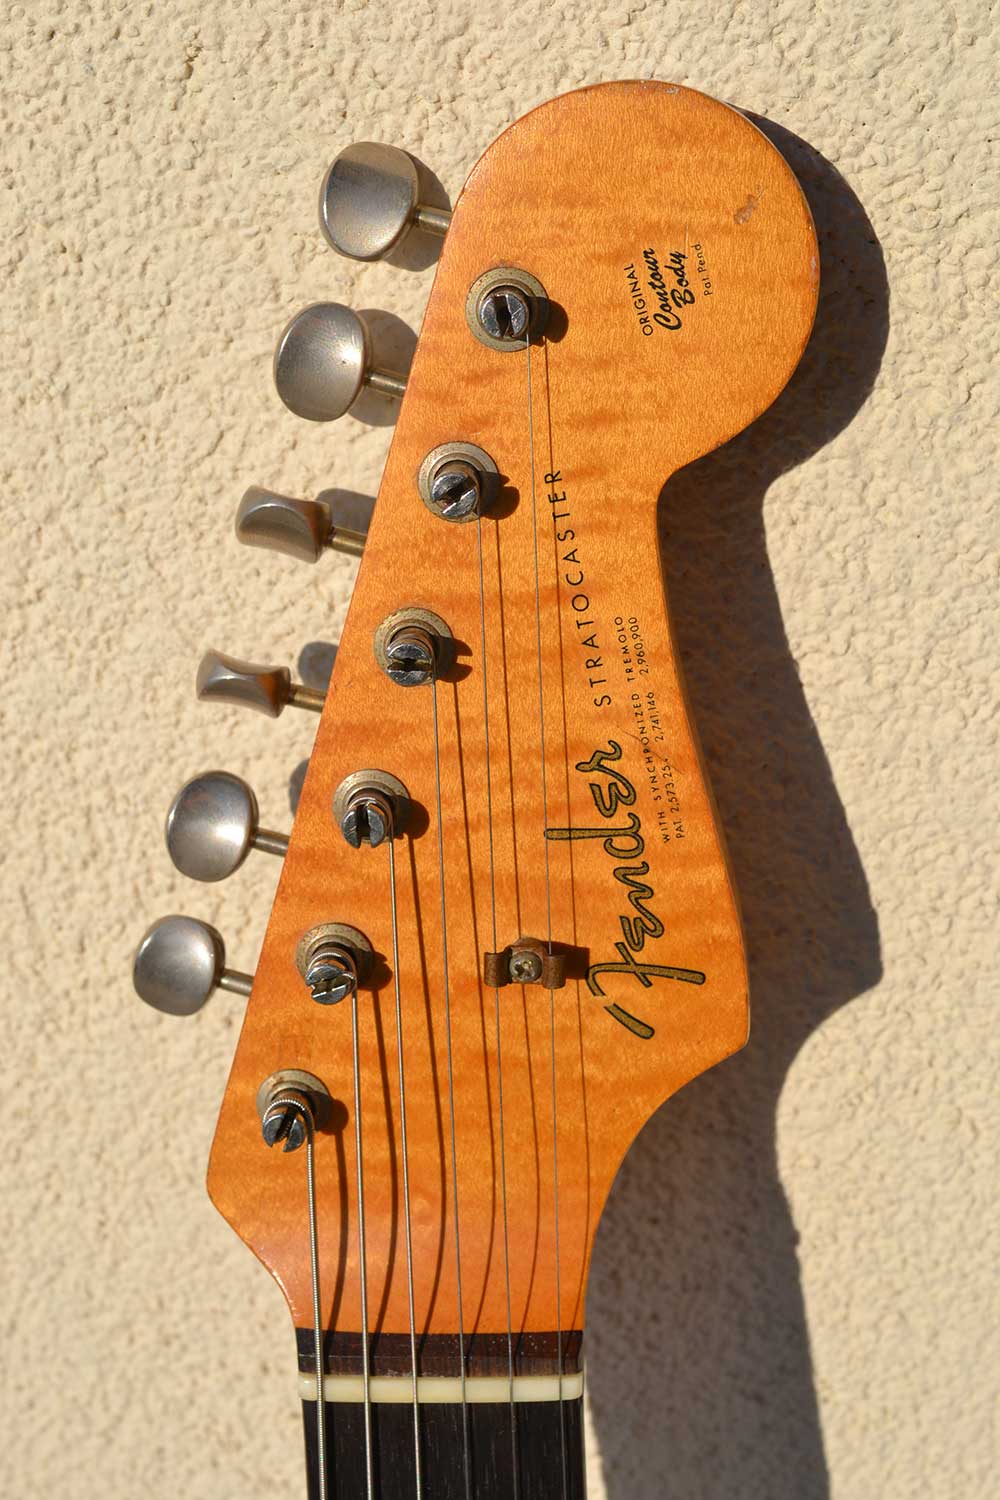 Seminary Abuse Cornwall 1963 Fender Stratocaster Candy Apple Red - L23458 - Cesco's Corner Guitars